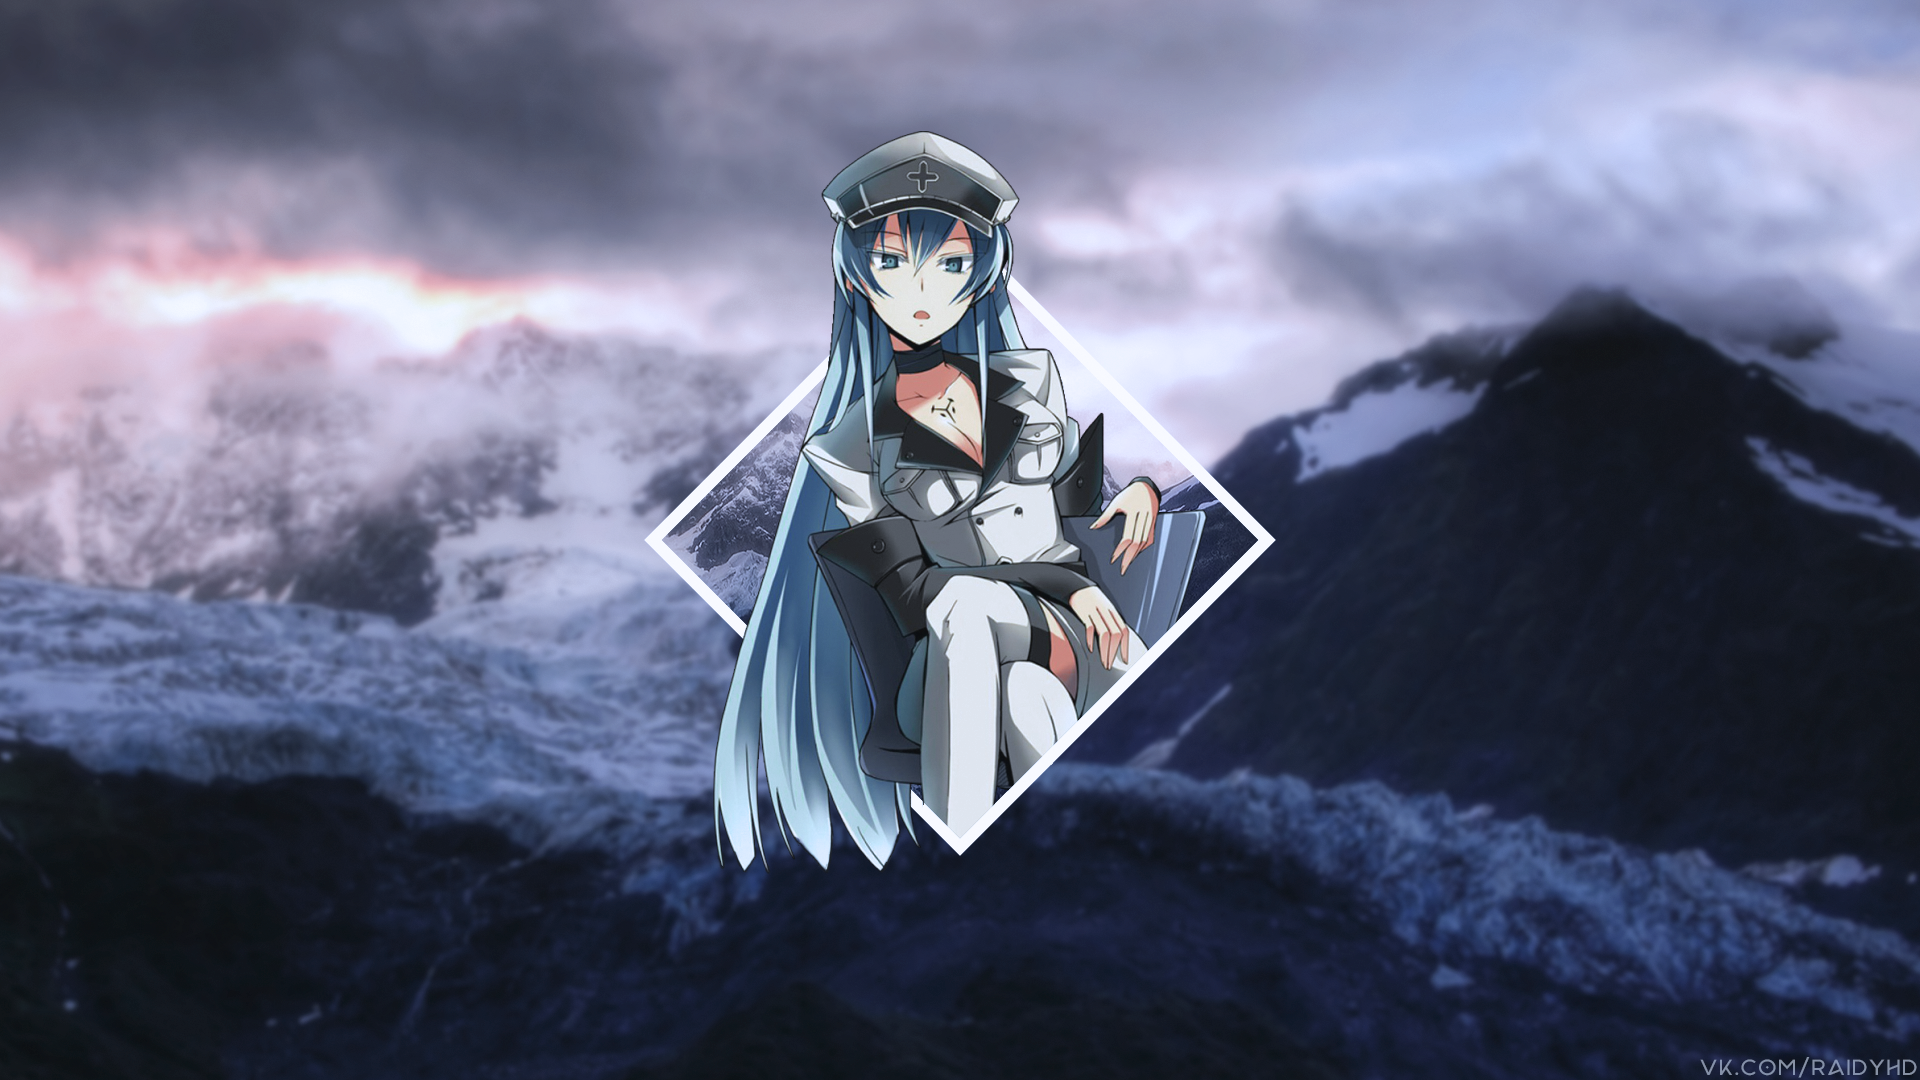 Anime Anime Girls Picture In Picture Esdeath Akame Ga Kill 1920x1080